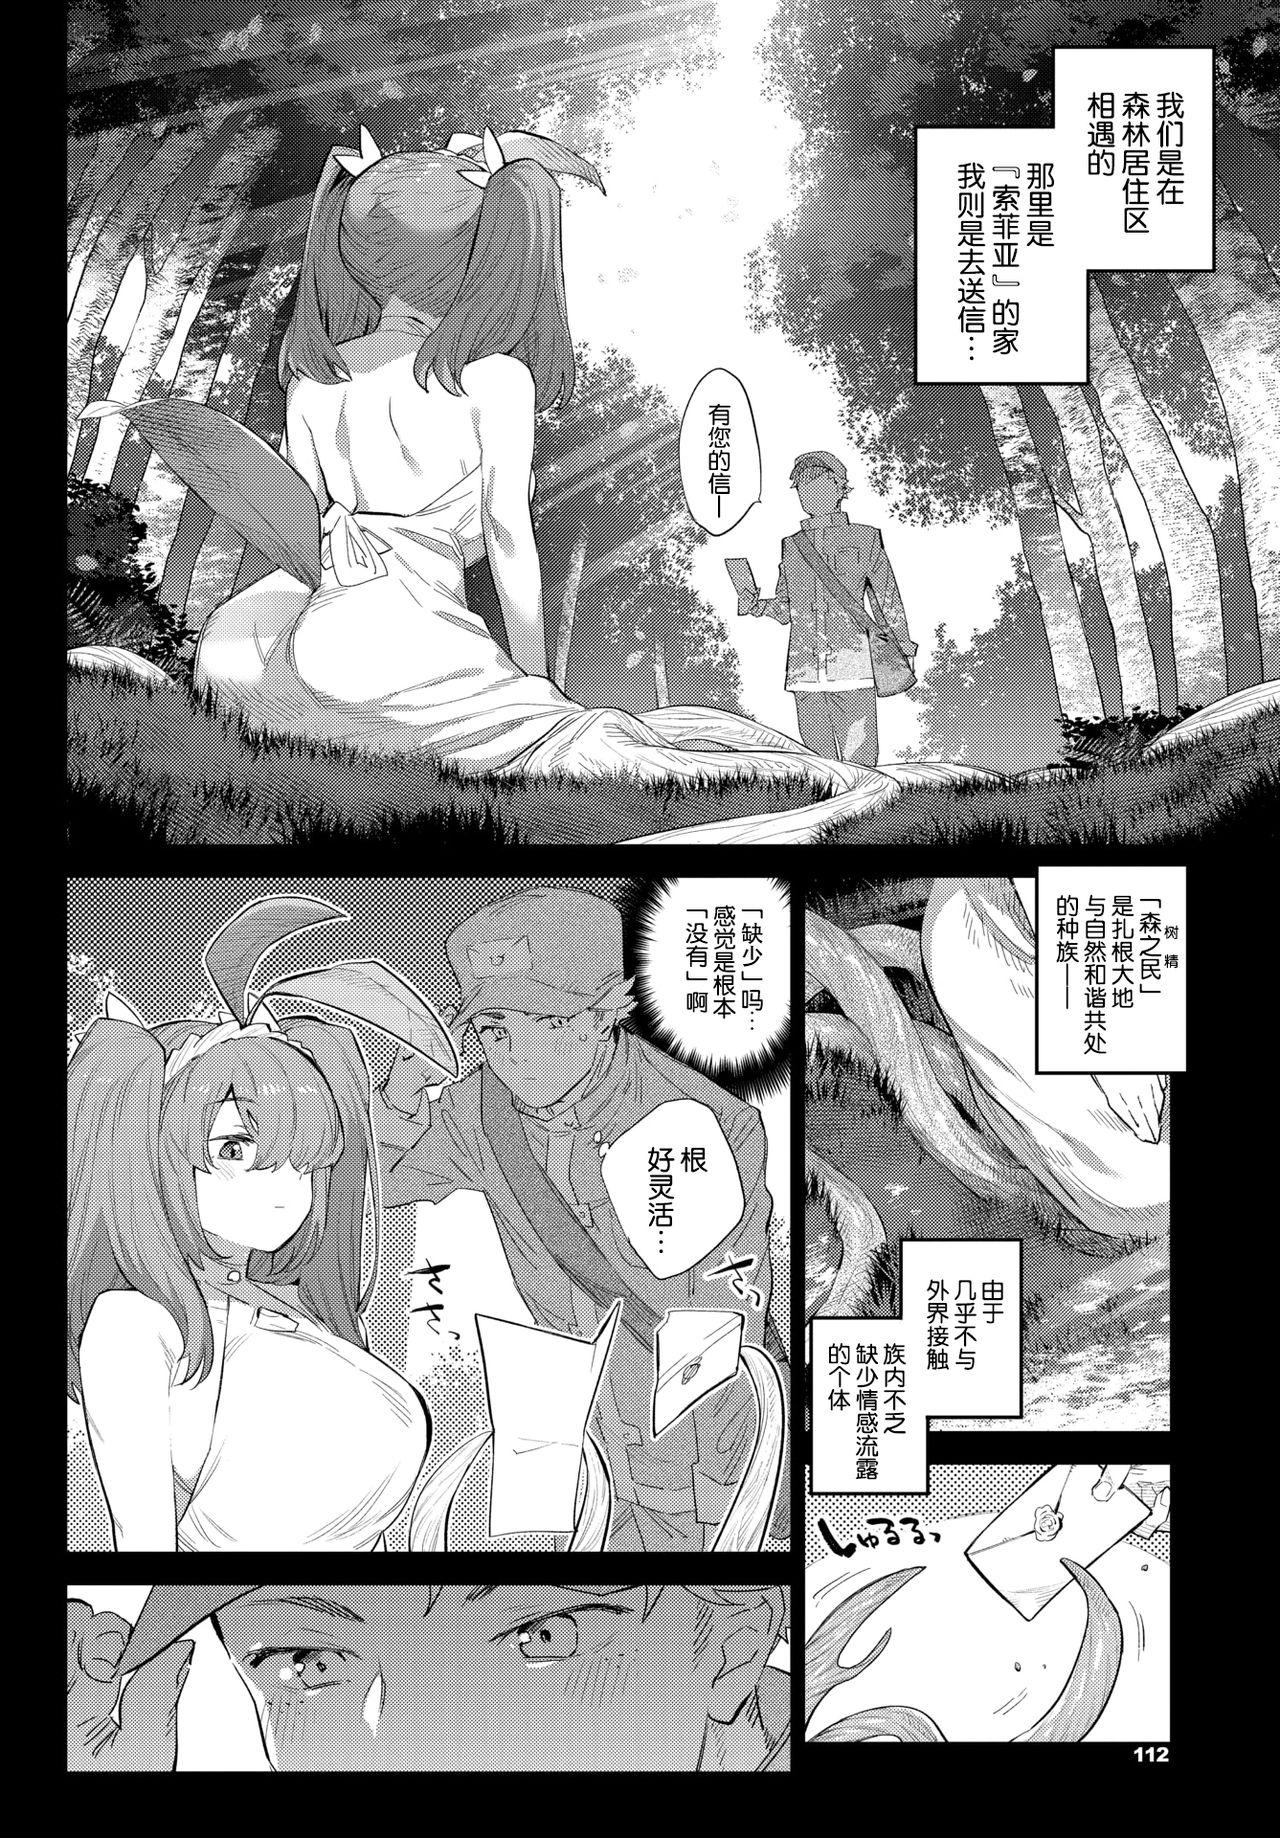 Ihou no Otome - Monster Girls in Another World 95